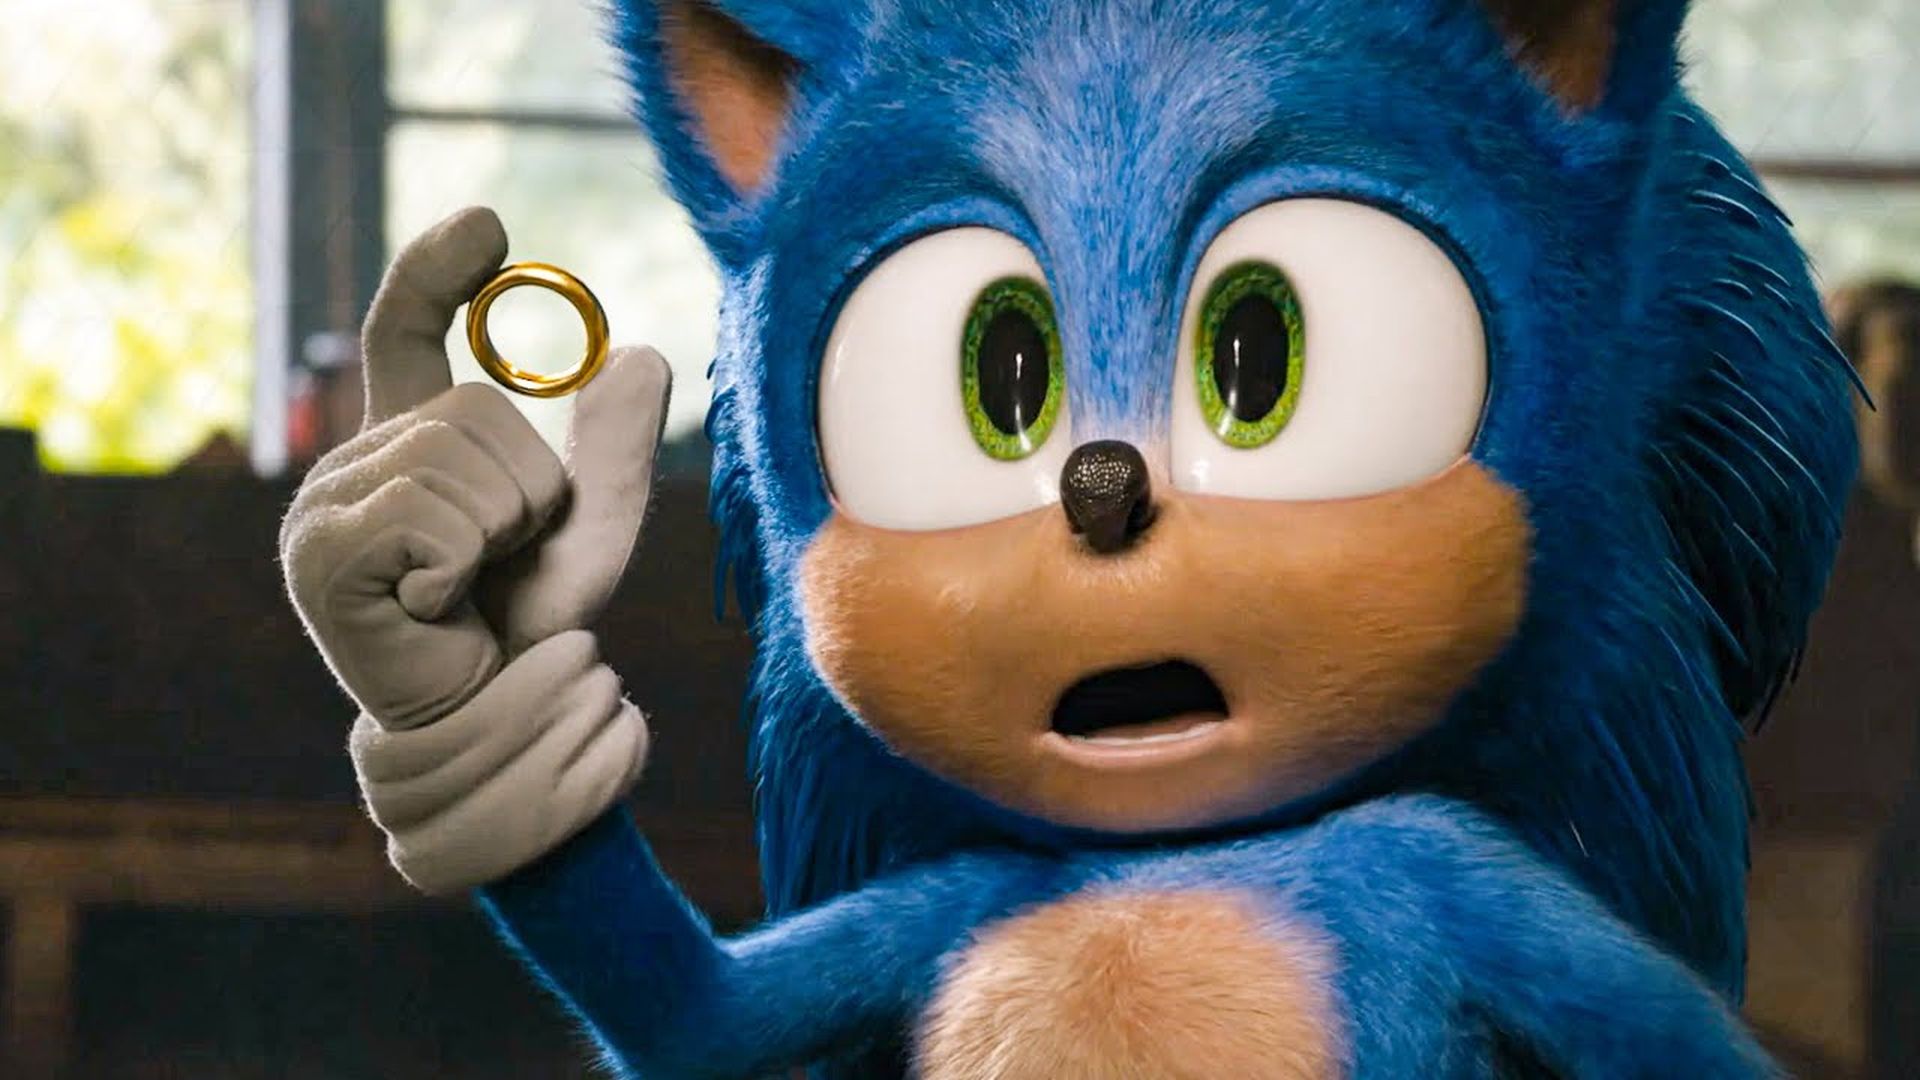 Sonic the Hedgehog Movie Trailer Features Baby Sonic